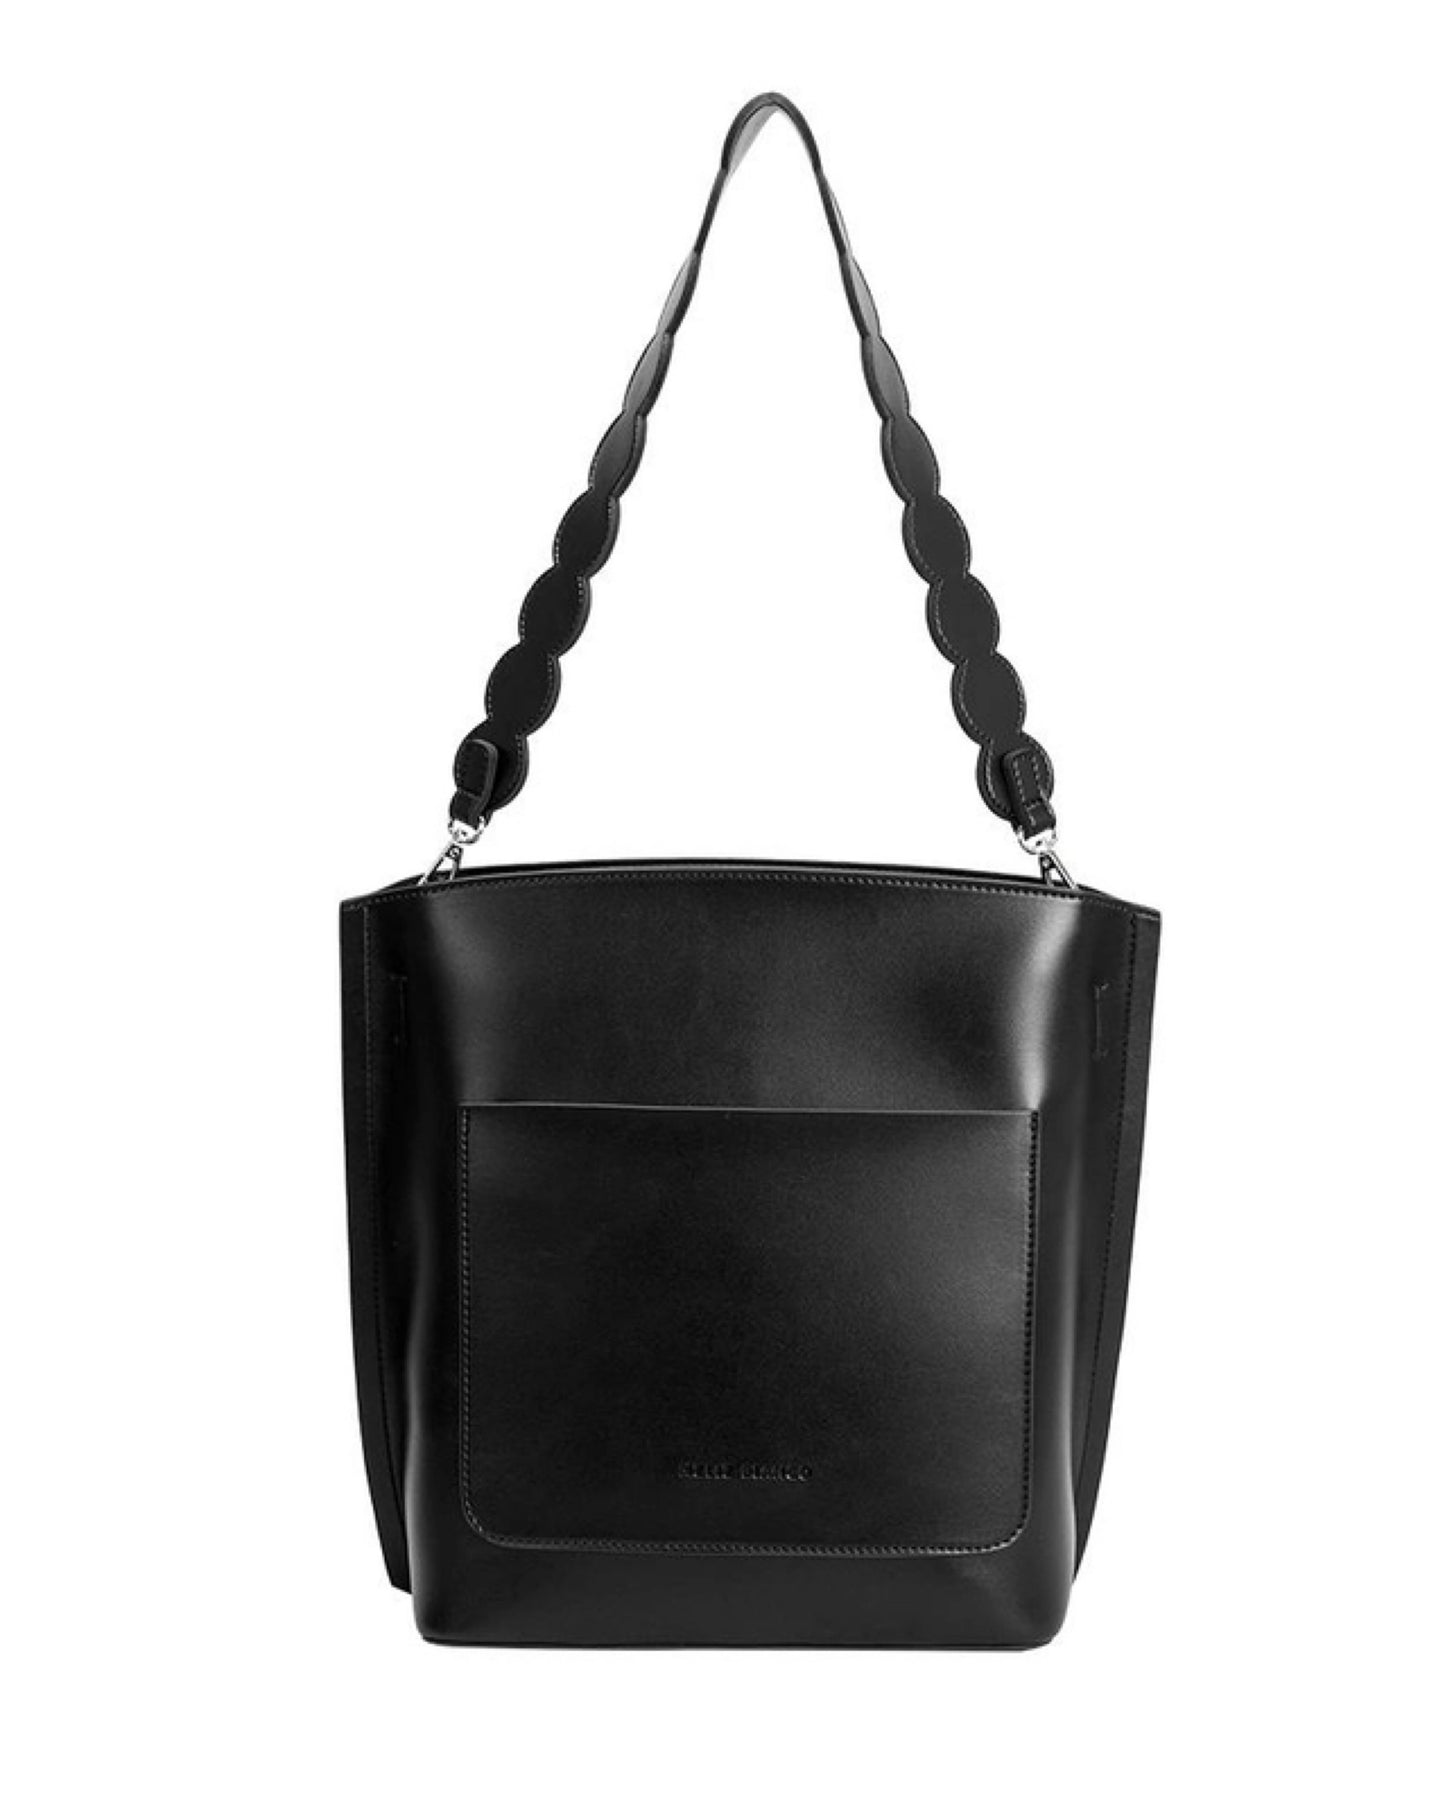 Madison Bucket Tote in Black with Lettuce Cut Strap